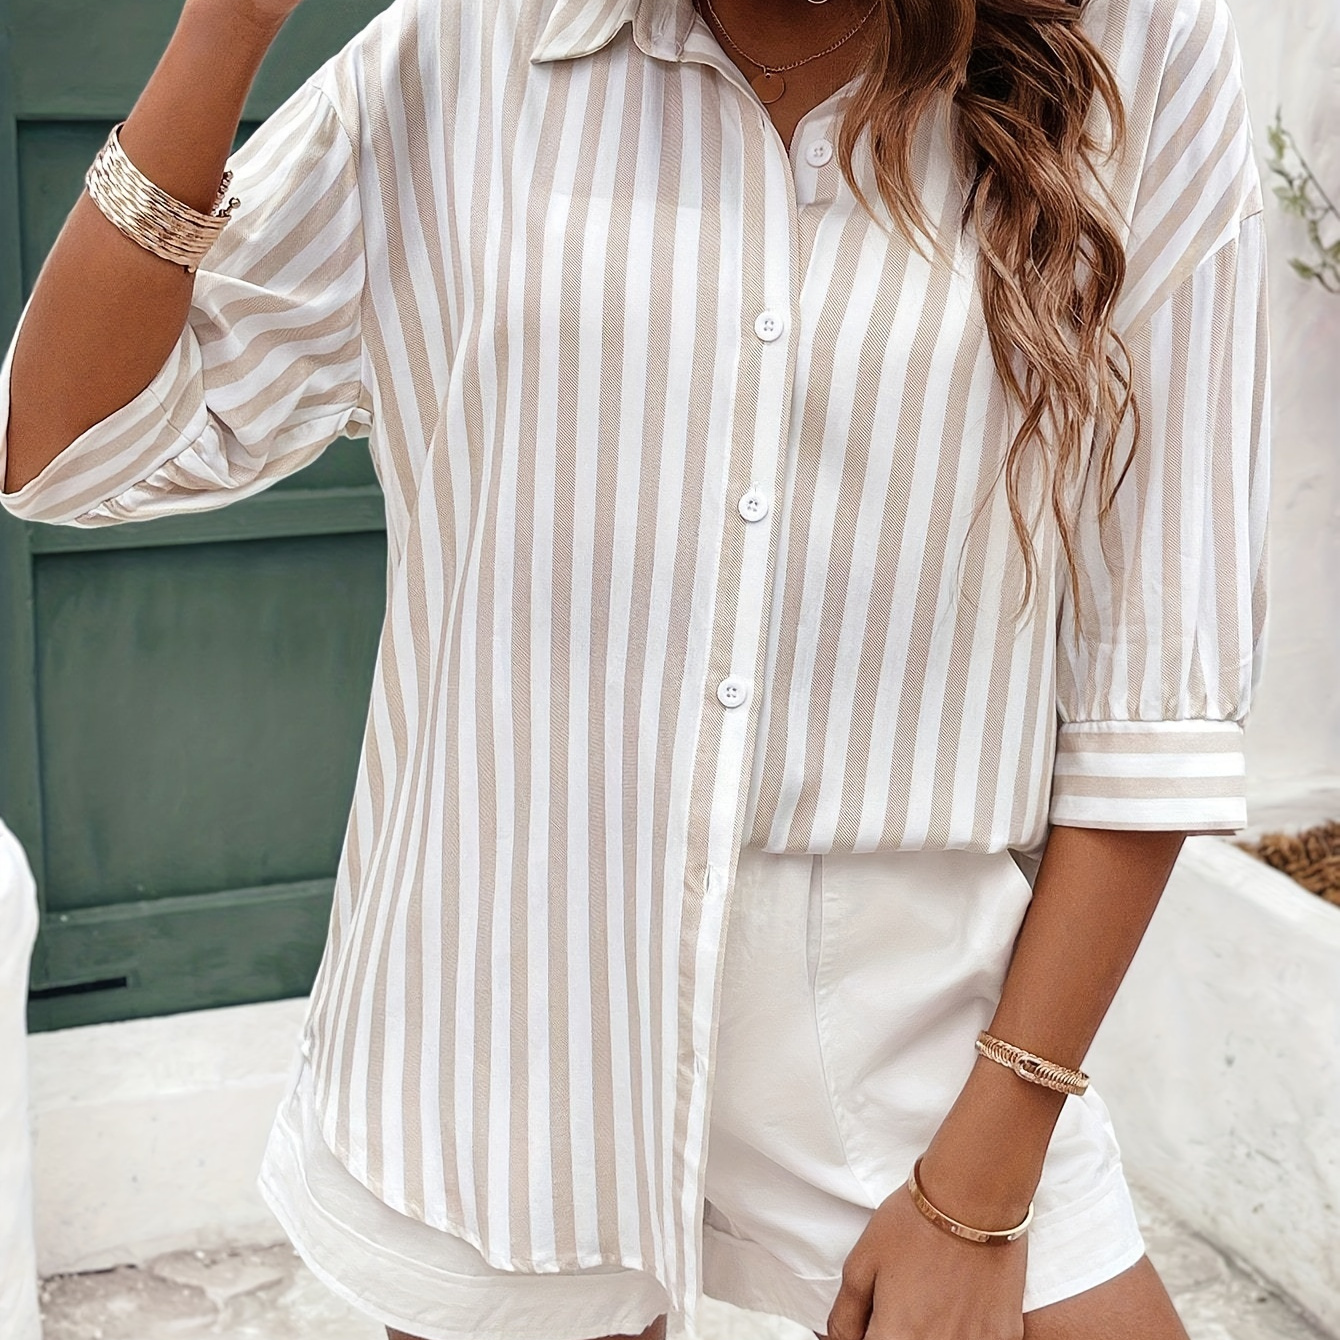 

Striped Print Button Up Loose Shirt, Vacation Short Sleeve Drop Shoulder Collared Shirt, Women's Clothing